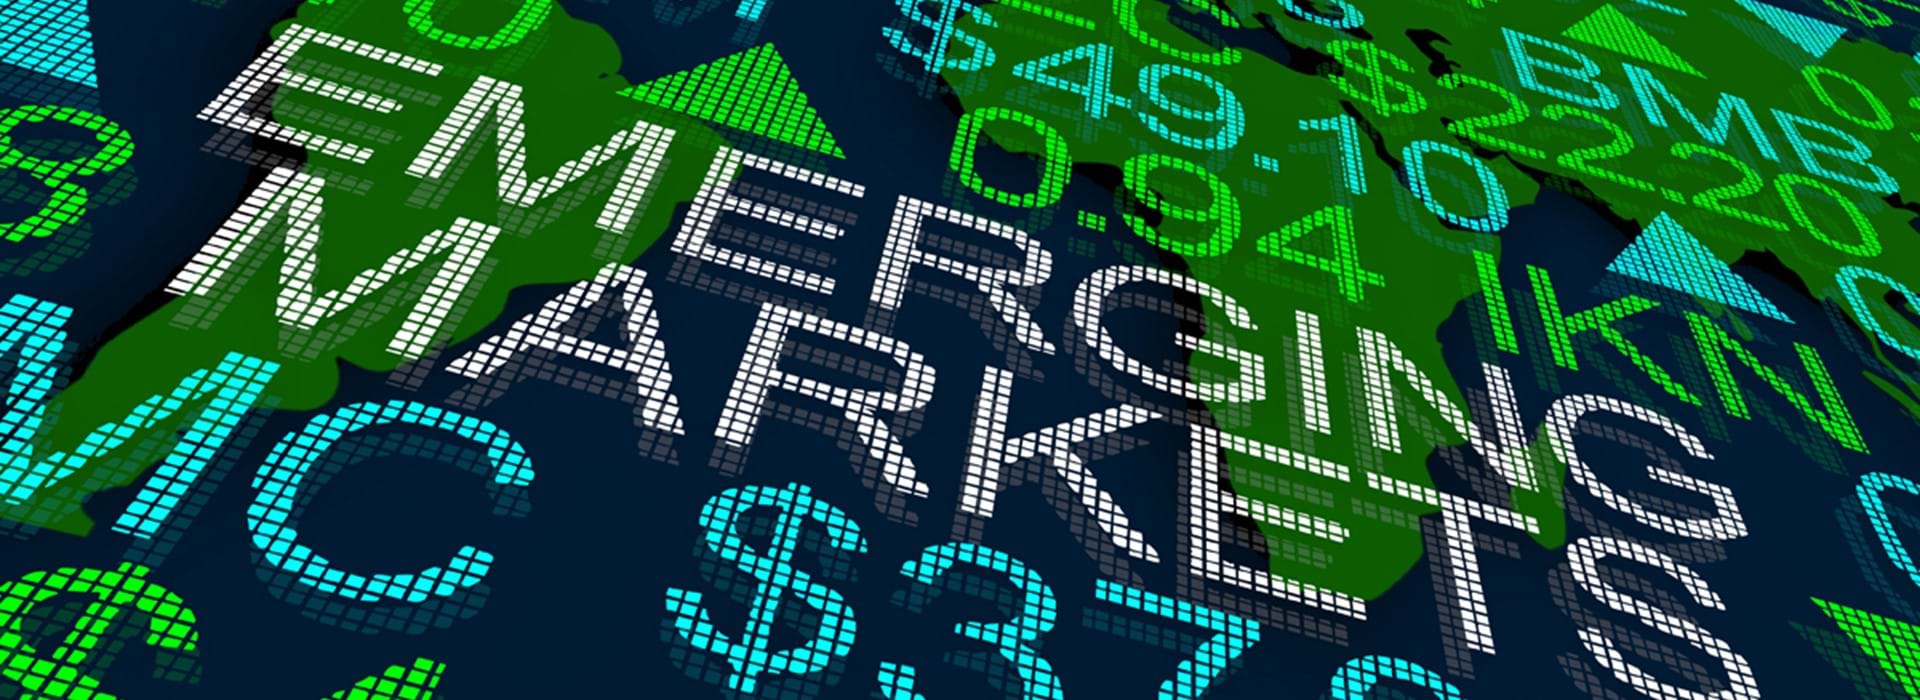 Market, trends & themes: emerging markets